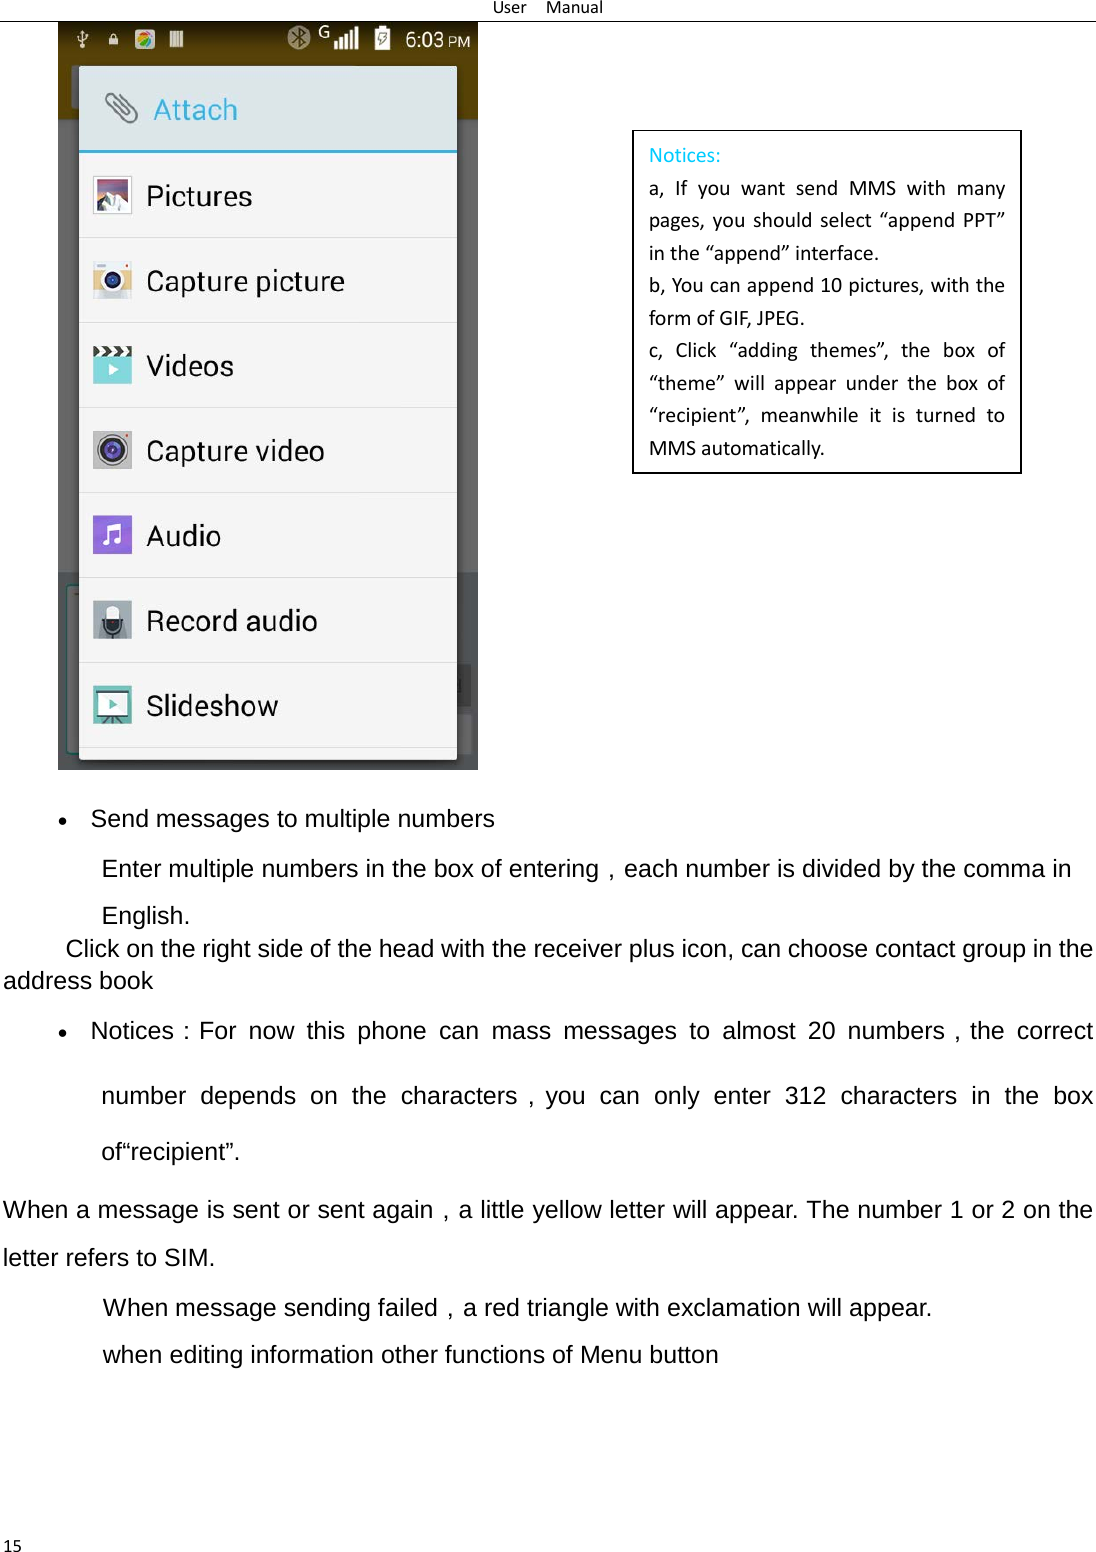 User  Manual 15 Notices: a, If you want send MMS with many pages, you should select “append PPT” in the “append” interface. b, You can append 10 pictures, with the form of GIF, JPEG.   c, Click “adding themes”, the box of “theme” will appear under the box of “recipient”, meanwhile it is turned to MMS automatically.    • Send messages to multiple numbers Enter multiple numbers in the box of entering，each number is divided by the comma in English. Click on the right side of the head with the receiver plus icon, can choose contact group in the address book   • Notices：For now this phone can mass messages to almost 20 numbers，the correct number depends on the characters，you can only enter 312 characters in the box of“recipient”. When a message is sent or sent again，a little yellow letter will appear. The number 1 or 2 on the letter refers to SIM.   When message sending failed，a red triangle with exclamation will appear.  when editing information other functions of Menu button      